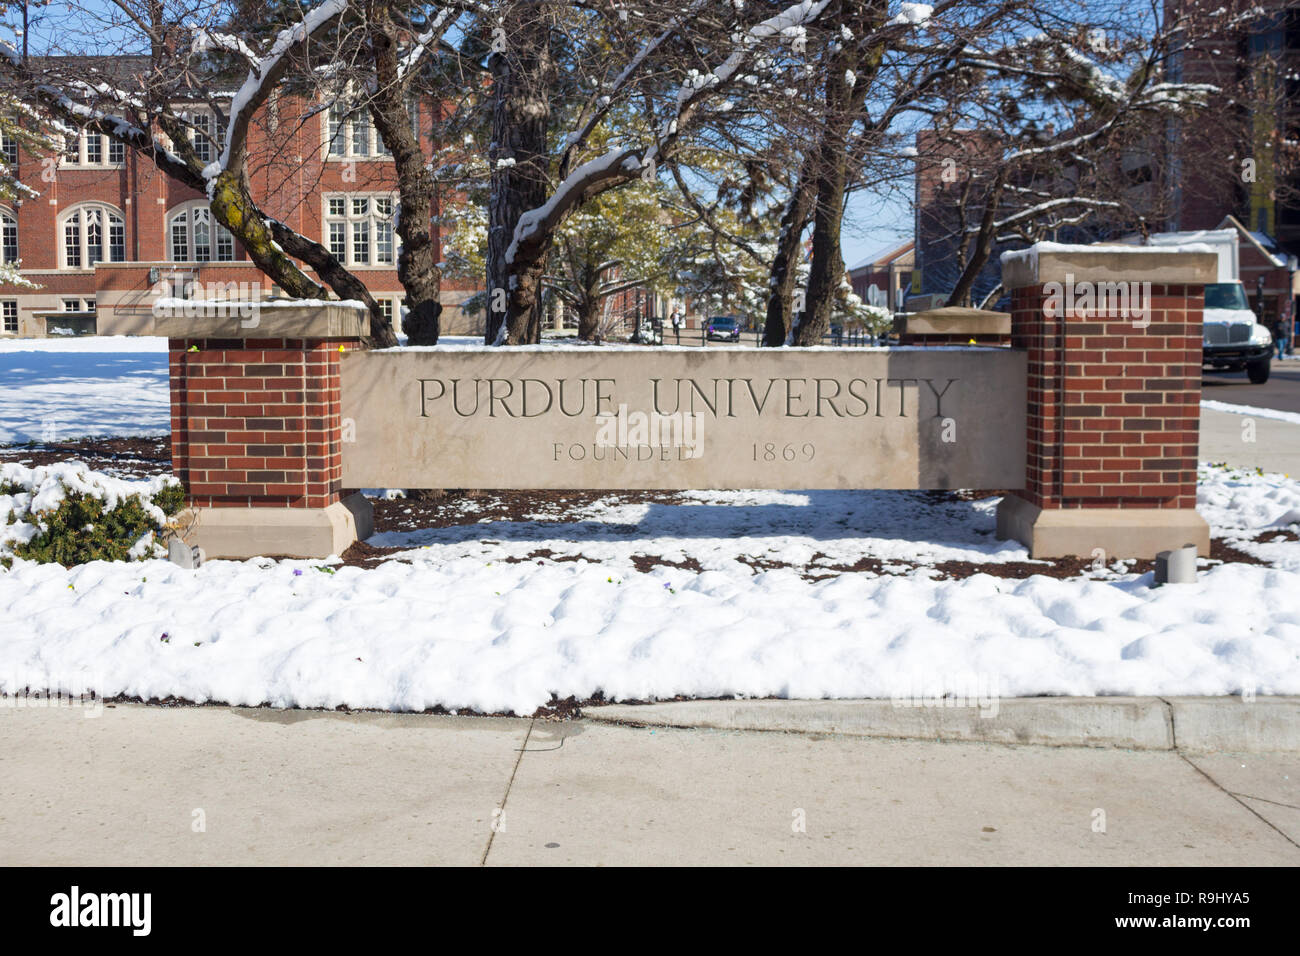 Purdue University sign with snow outside Memorial Union, Purdue University campus, West Lafayette, Indiana, United States Stock Photo